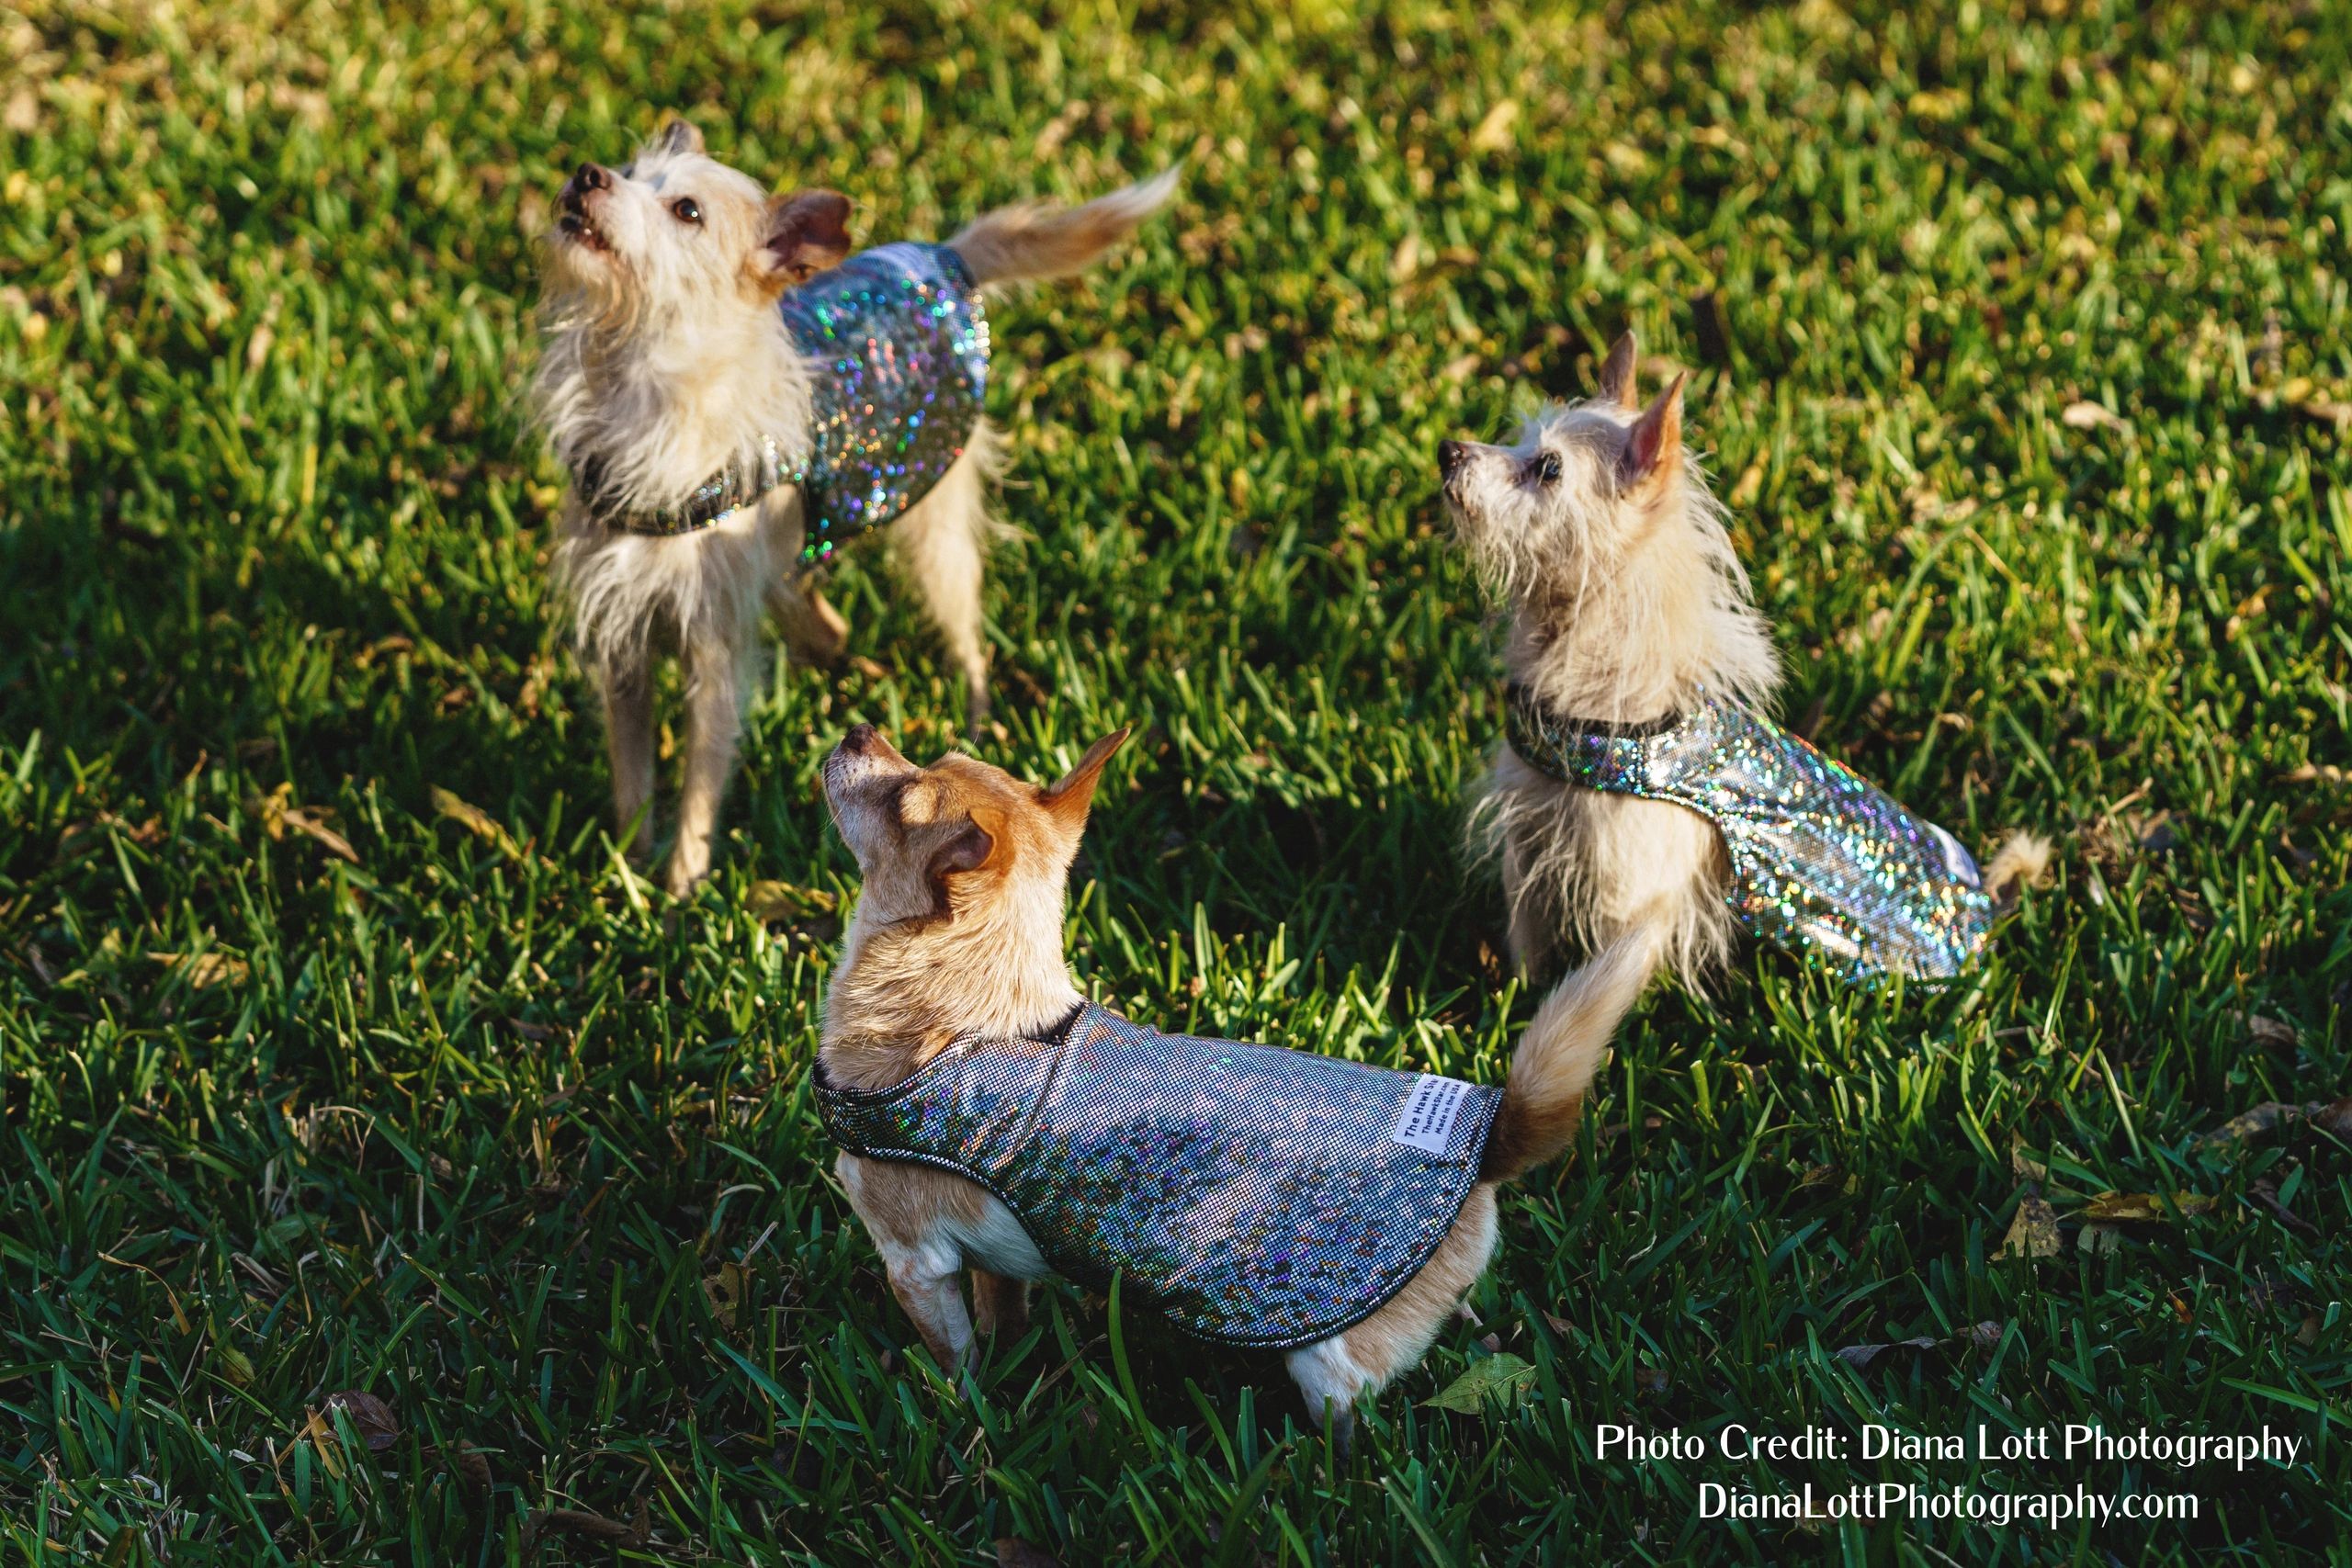 Pet Protection Vests with Spikes Help Protect Small Dogs from Predators